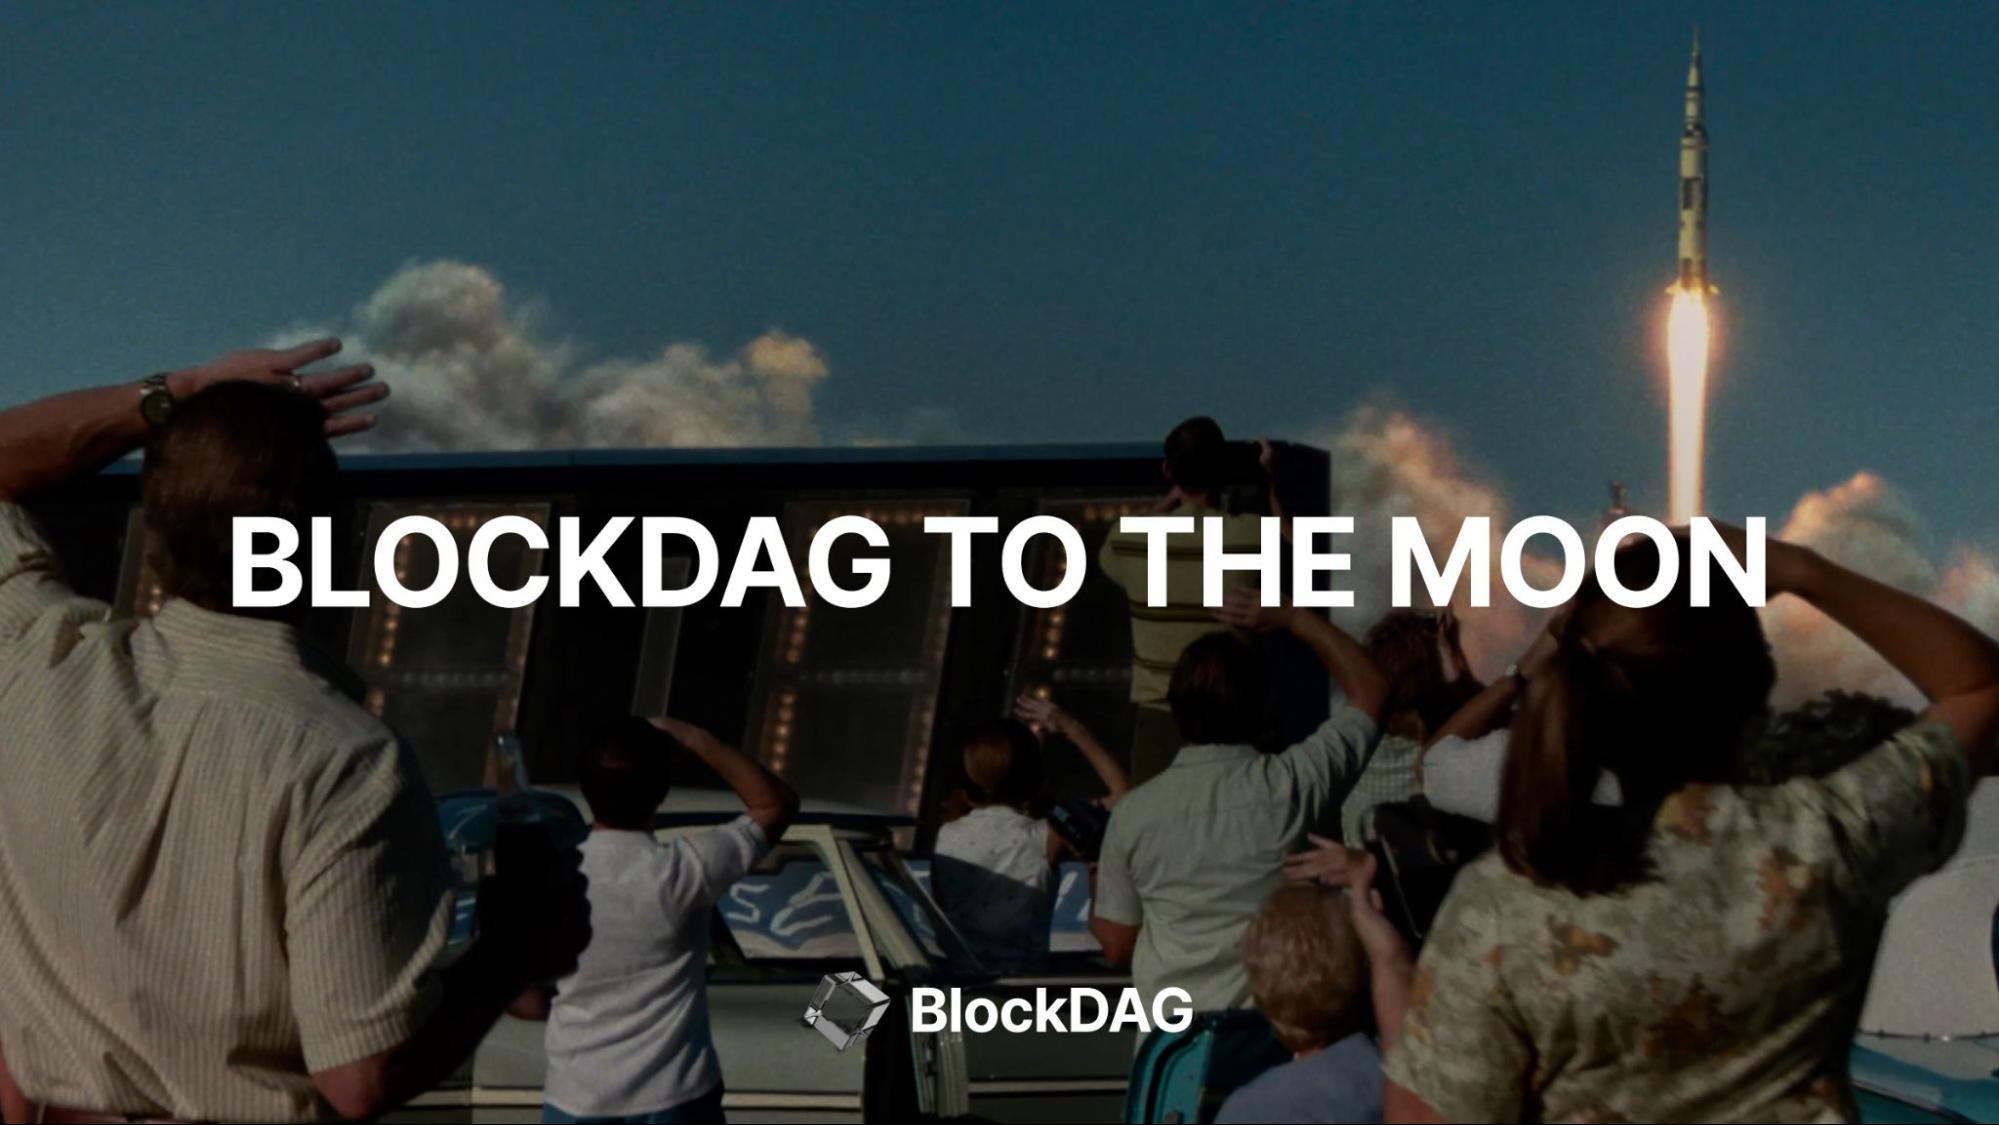 , With $34M Raised, BlockDAG Network Just Announced its Second Video Release: “Countdown to Keynote 2 From the Moon”